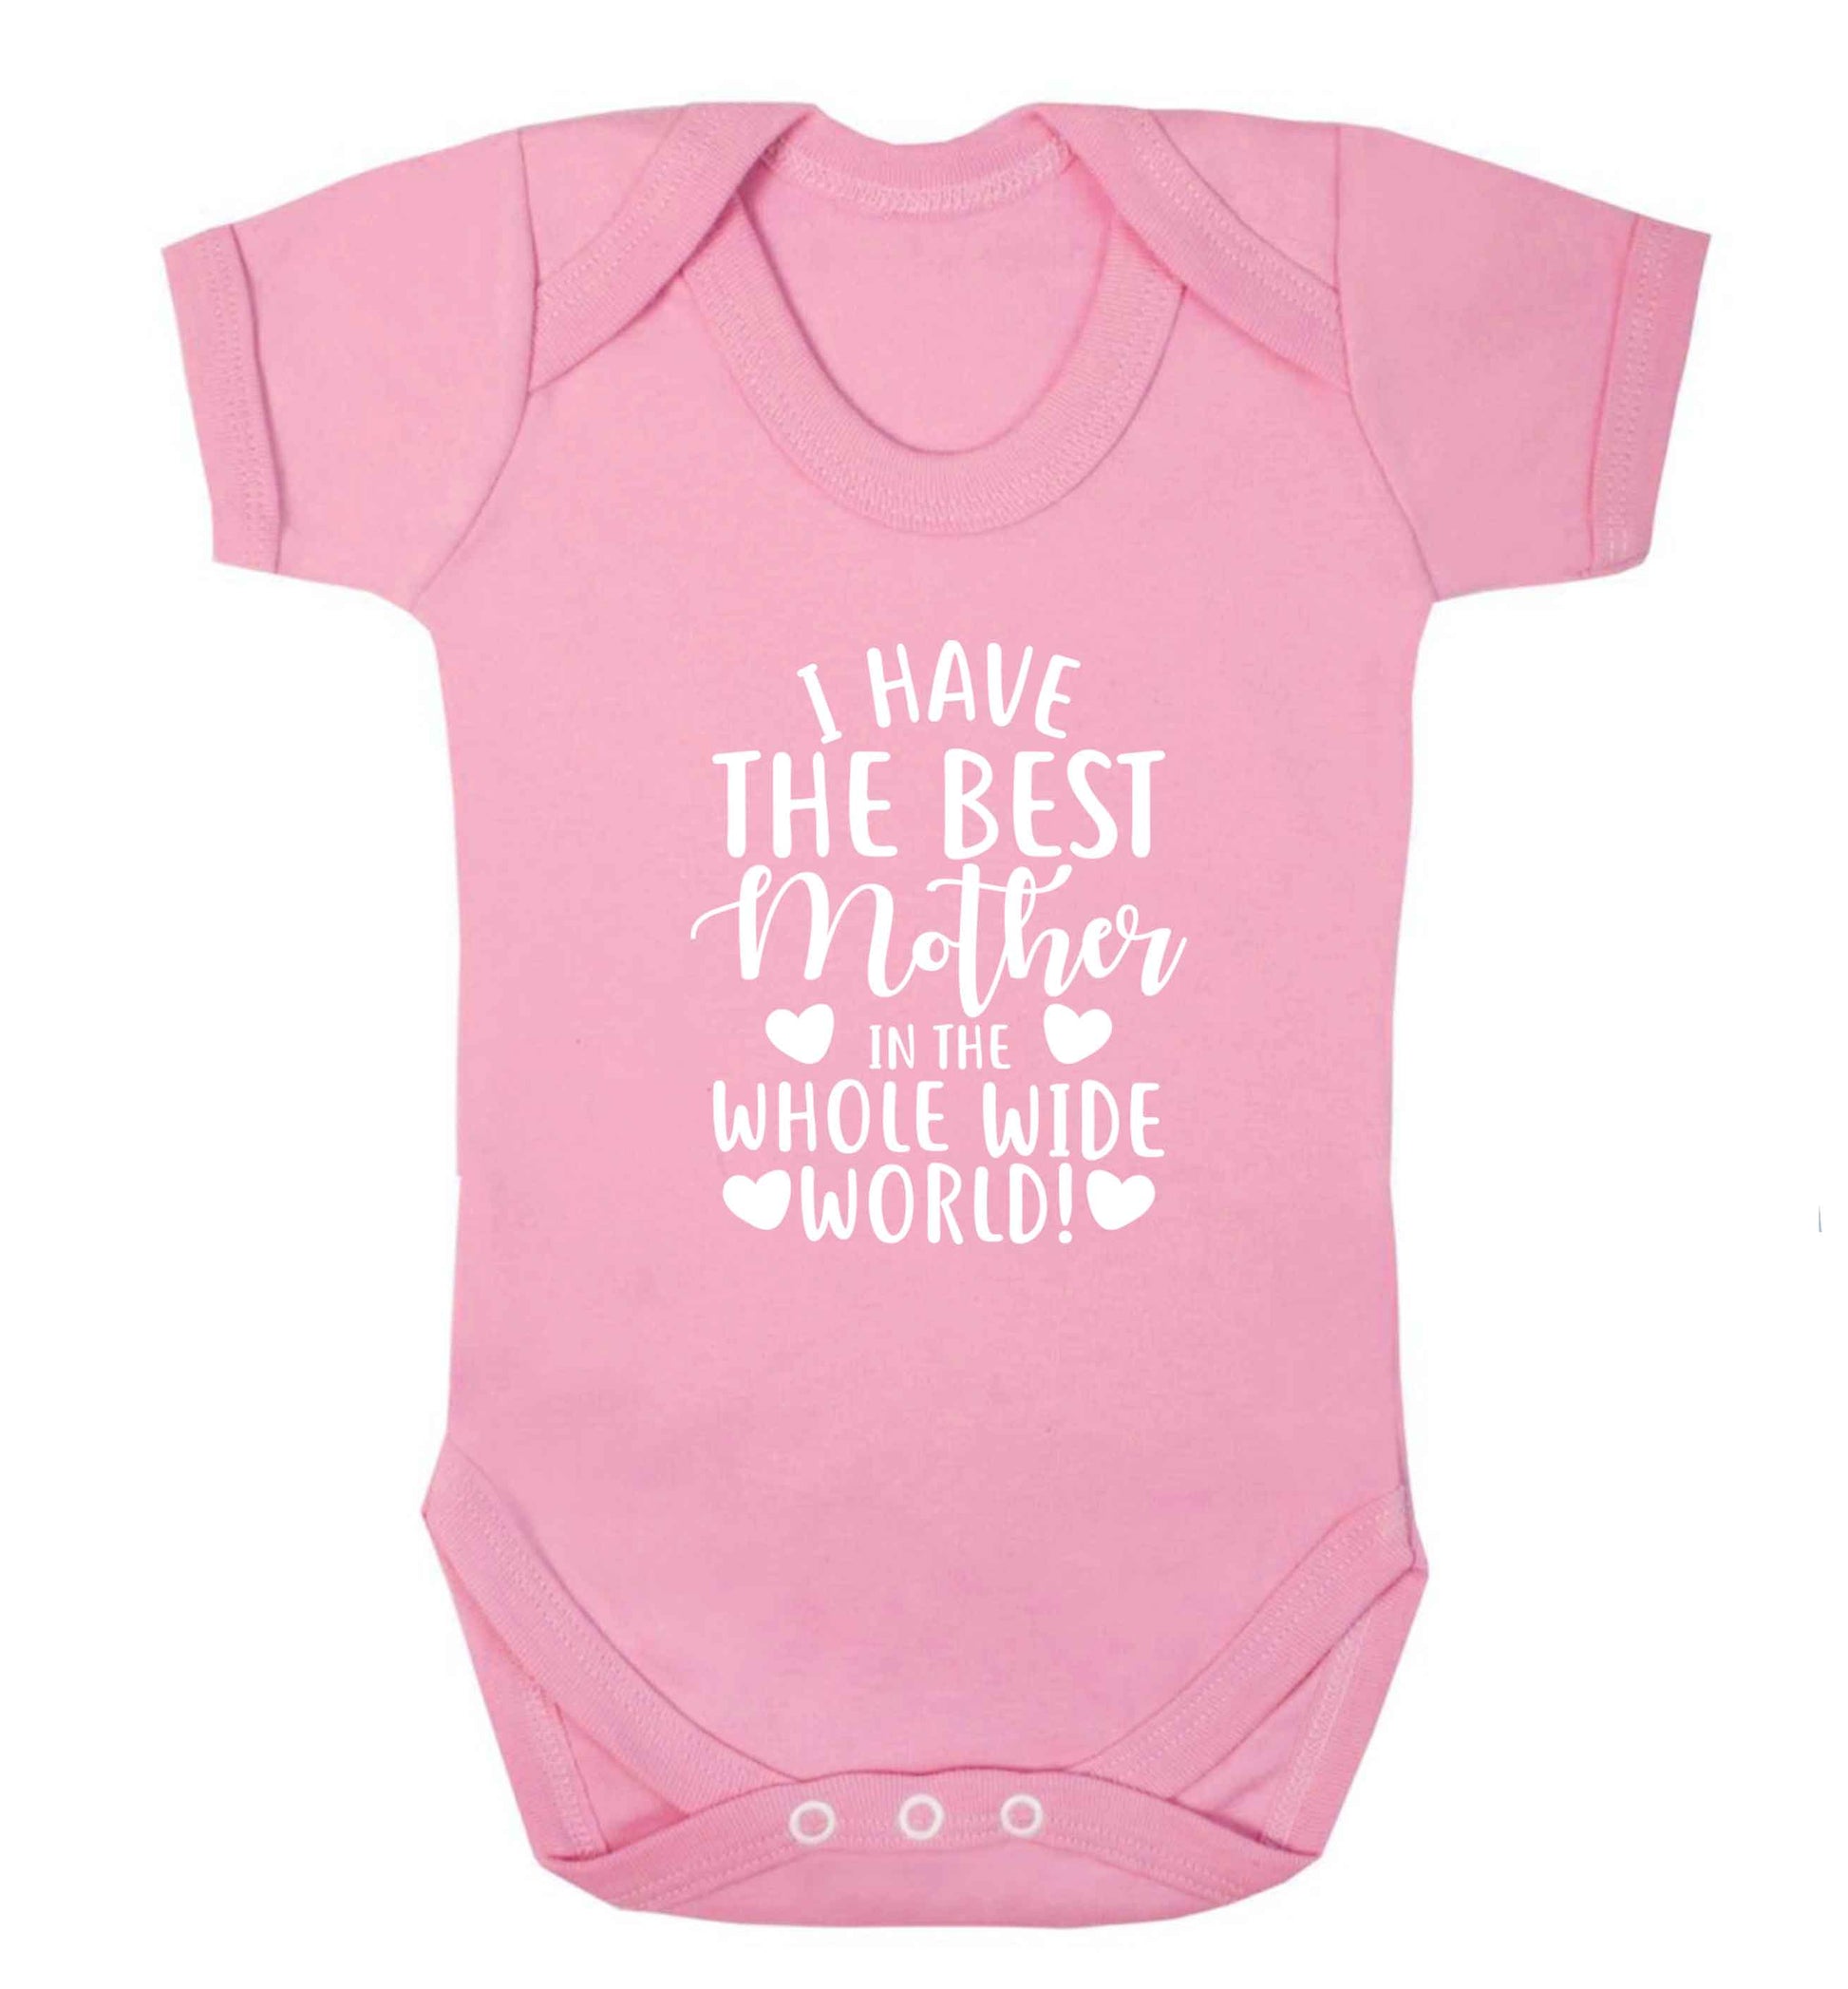 I have the best mother in the whole wide world baby vest pale pink 18-24 months